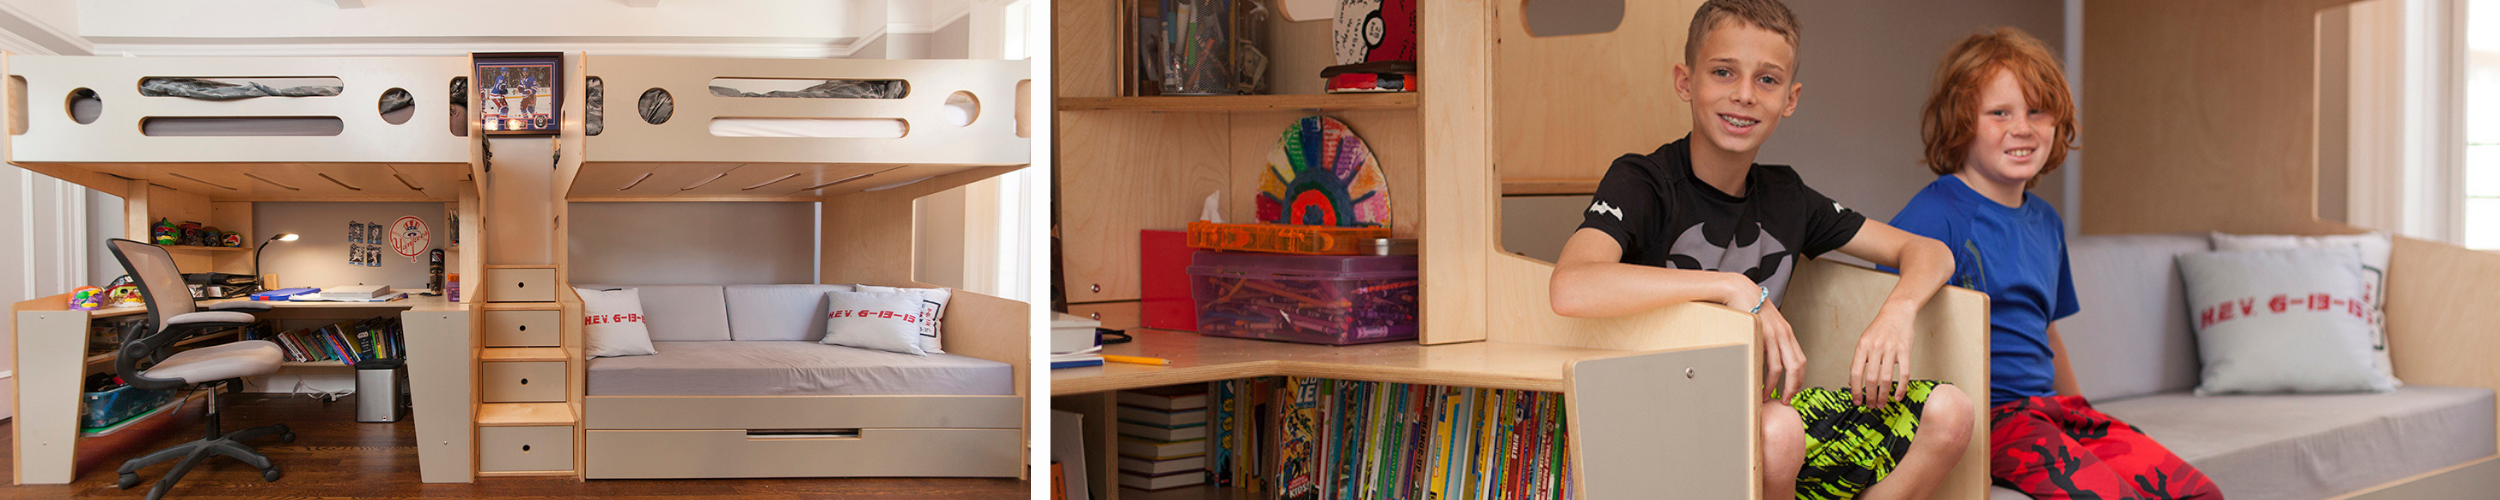 Two images: left, bunk bed with study area below; right, two boys smiling, sitting on a bed.